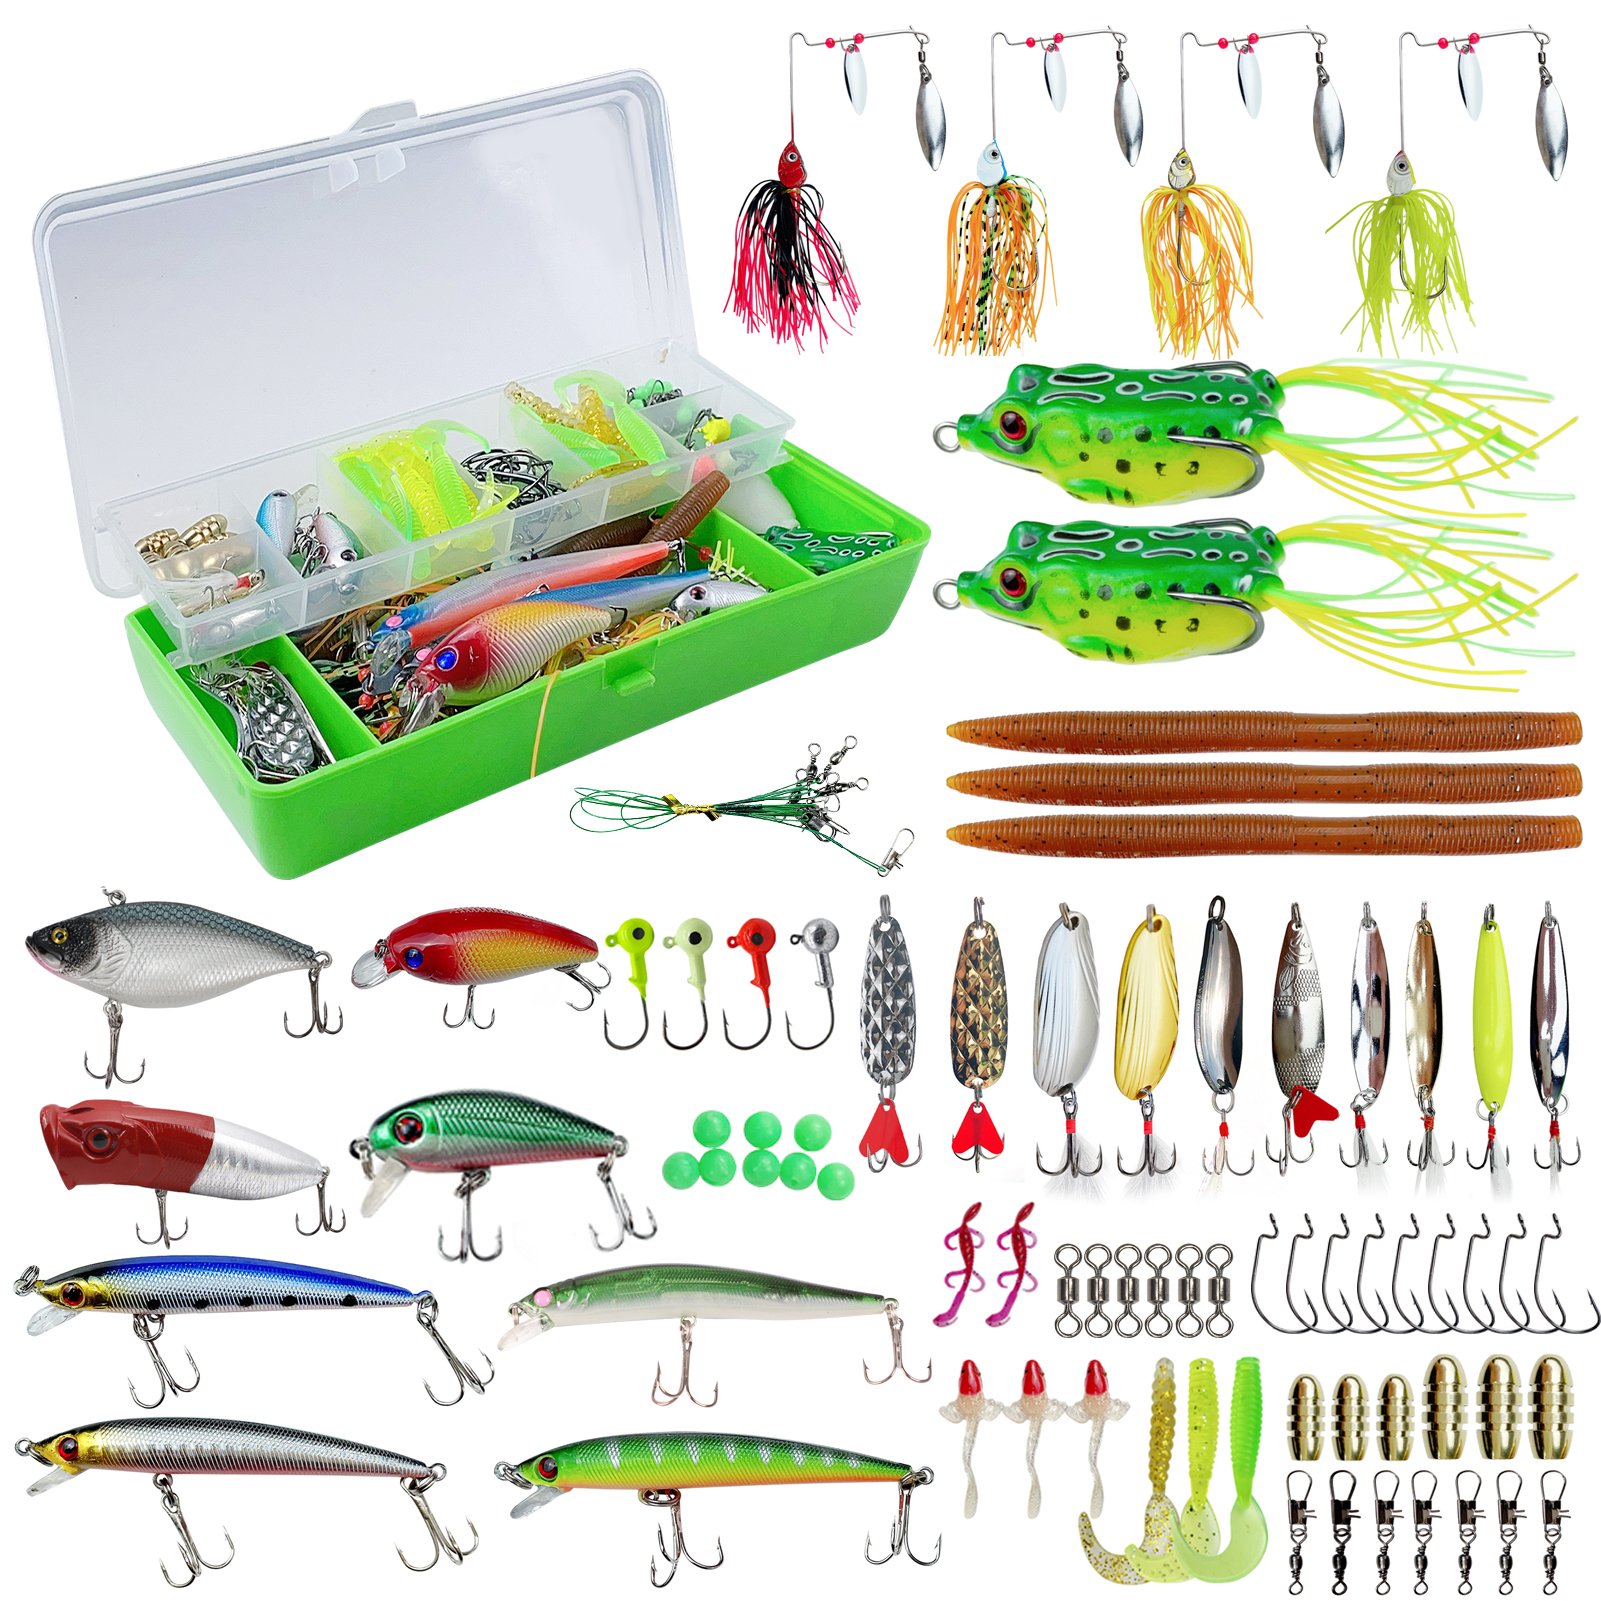 FREE FISHER Fishing Lures Baits Crankbaits/Spinnerbaits/Plastic Worms/Jigs/Popper/Minnows/Crank Hooks/Spoon/Metal Jigs/Frogs/Swivels with Accessory Box